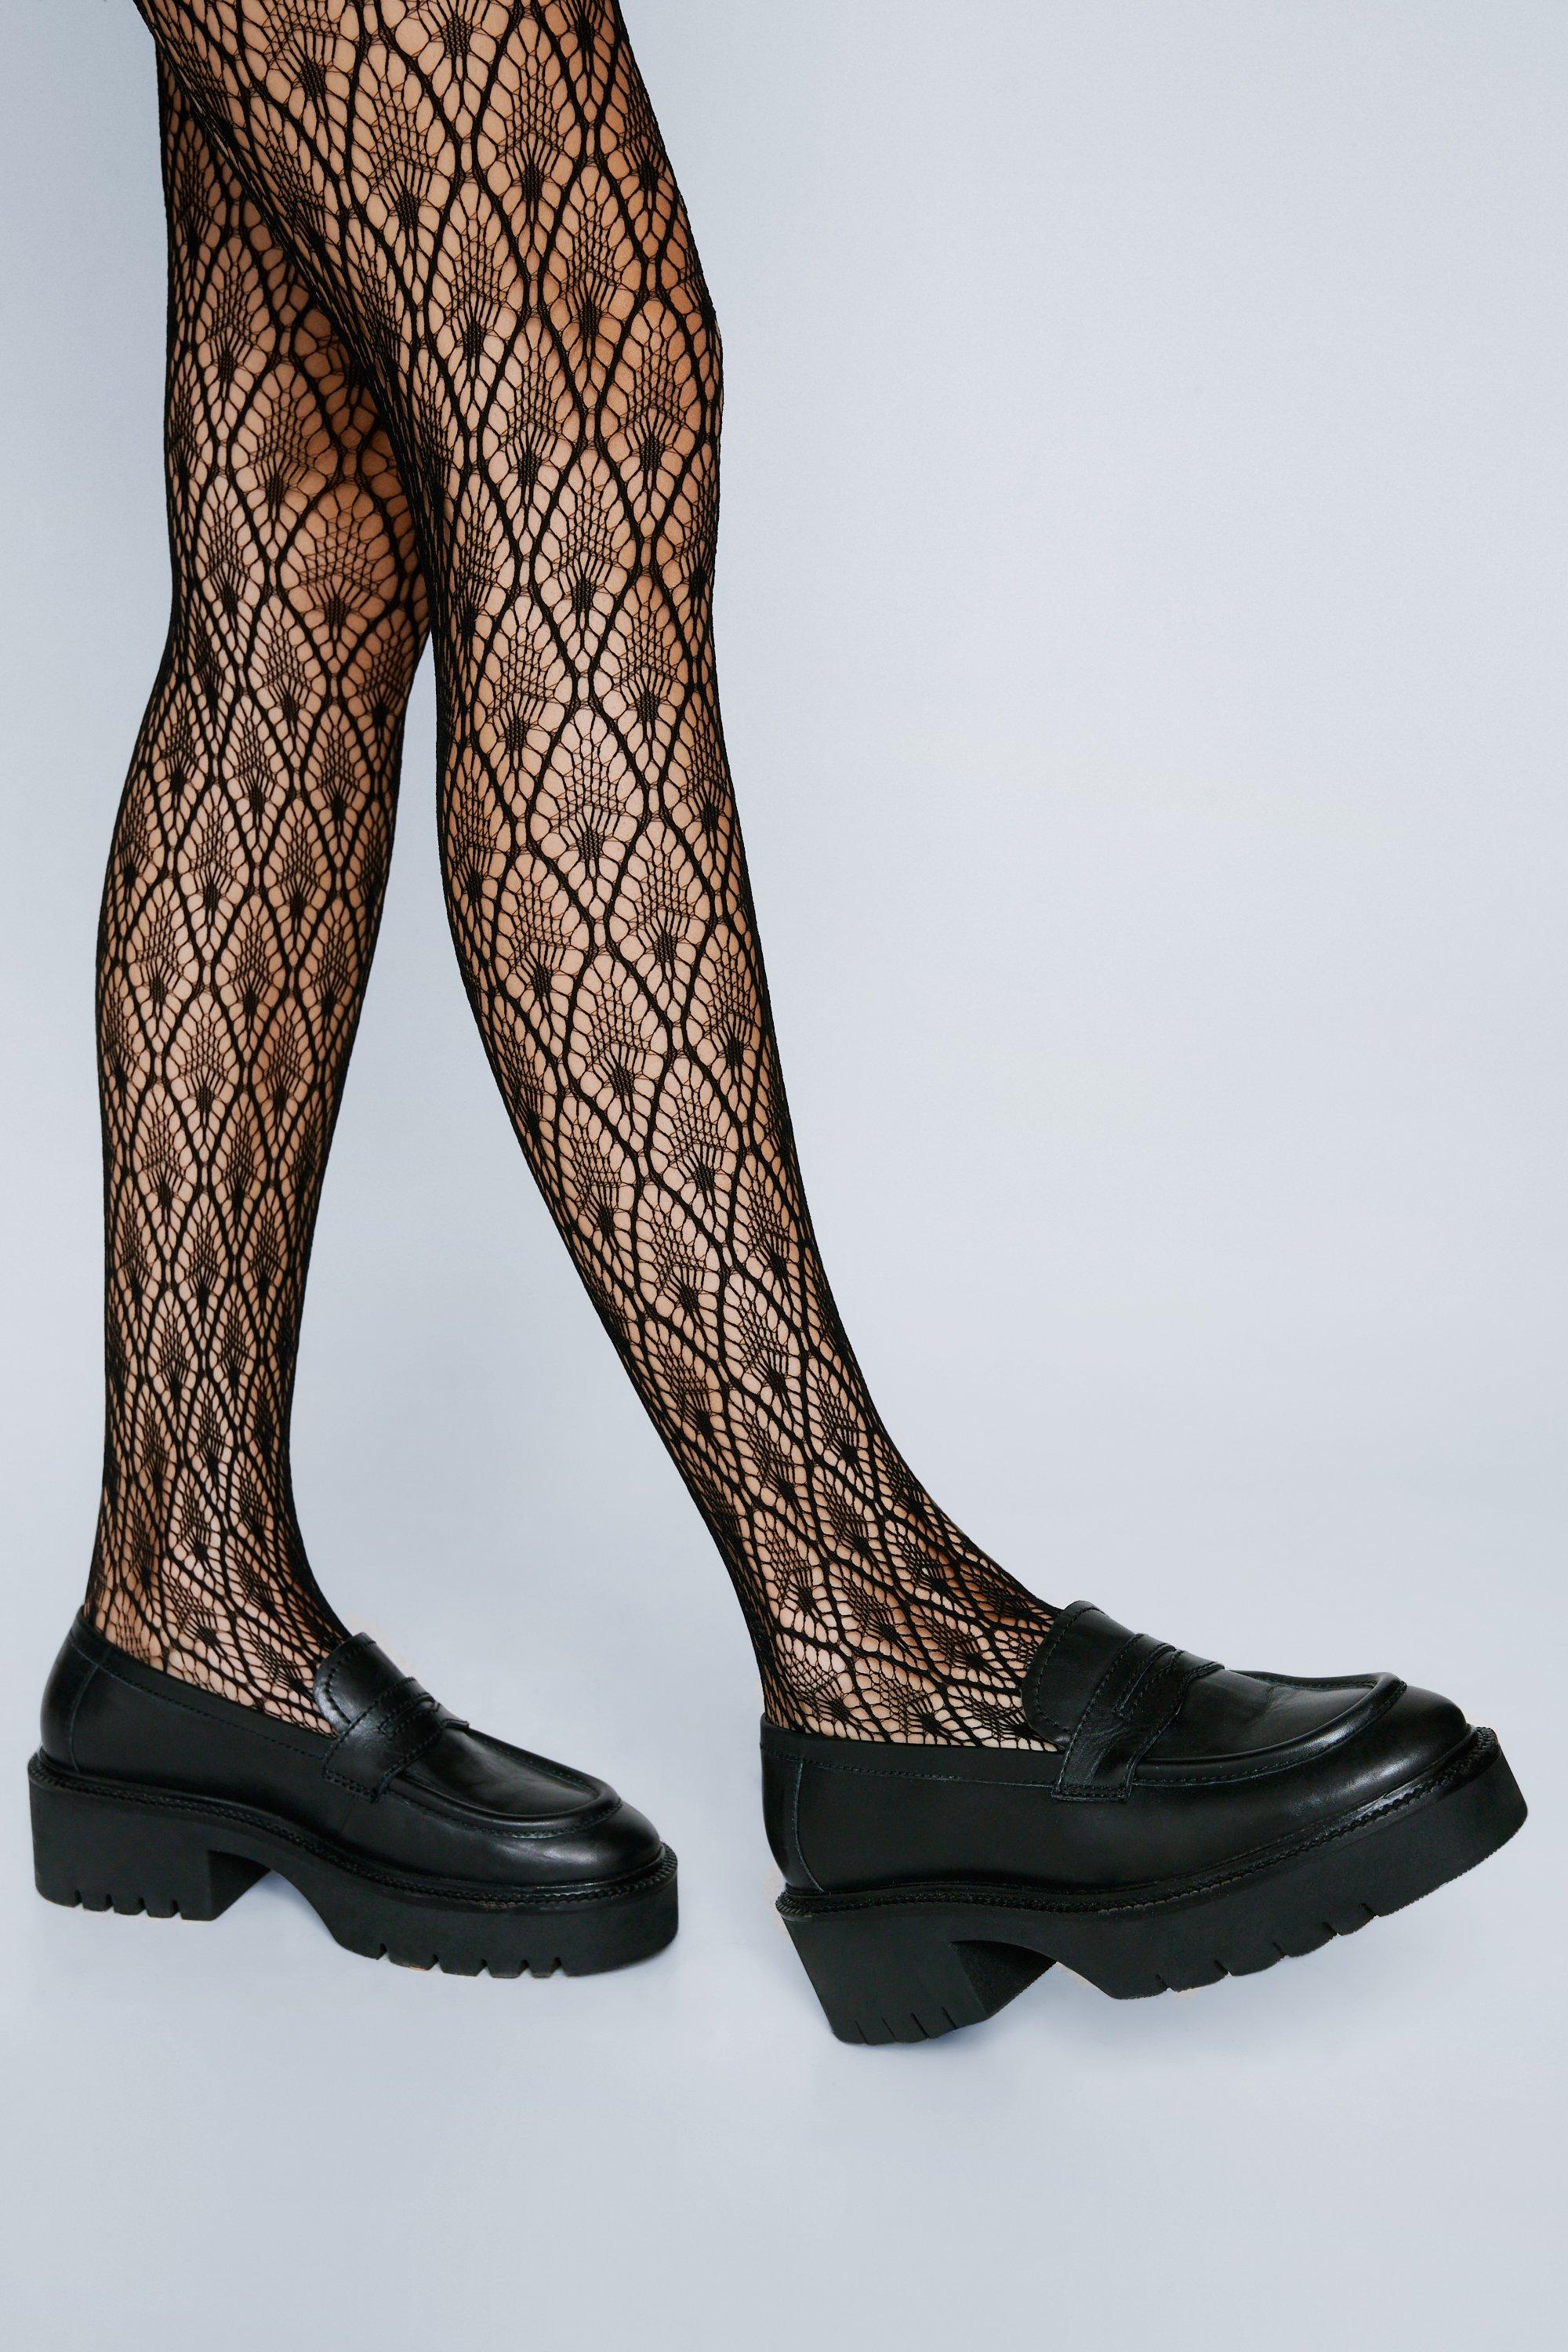 Peacock Feather Patterned Fishnet Tights